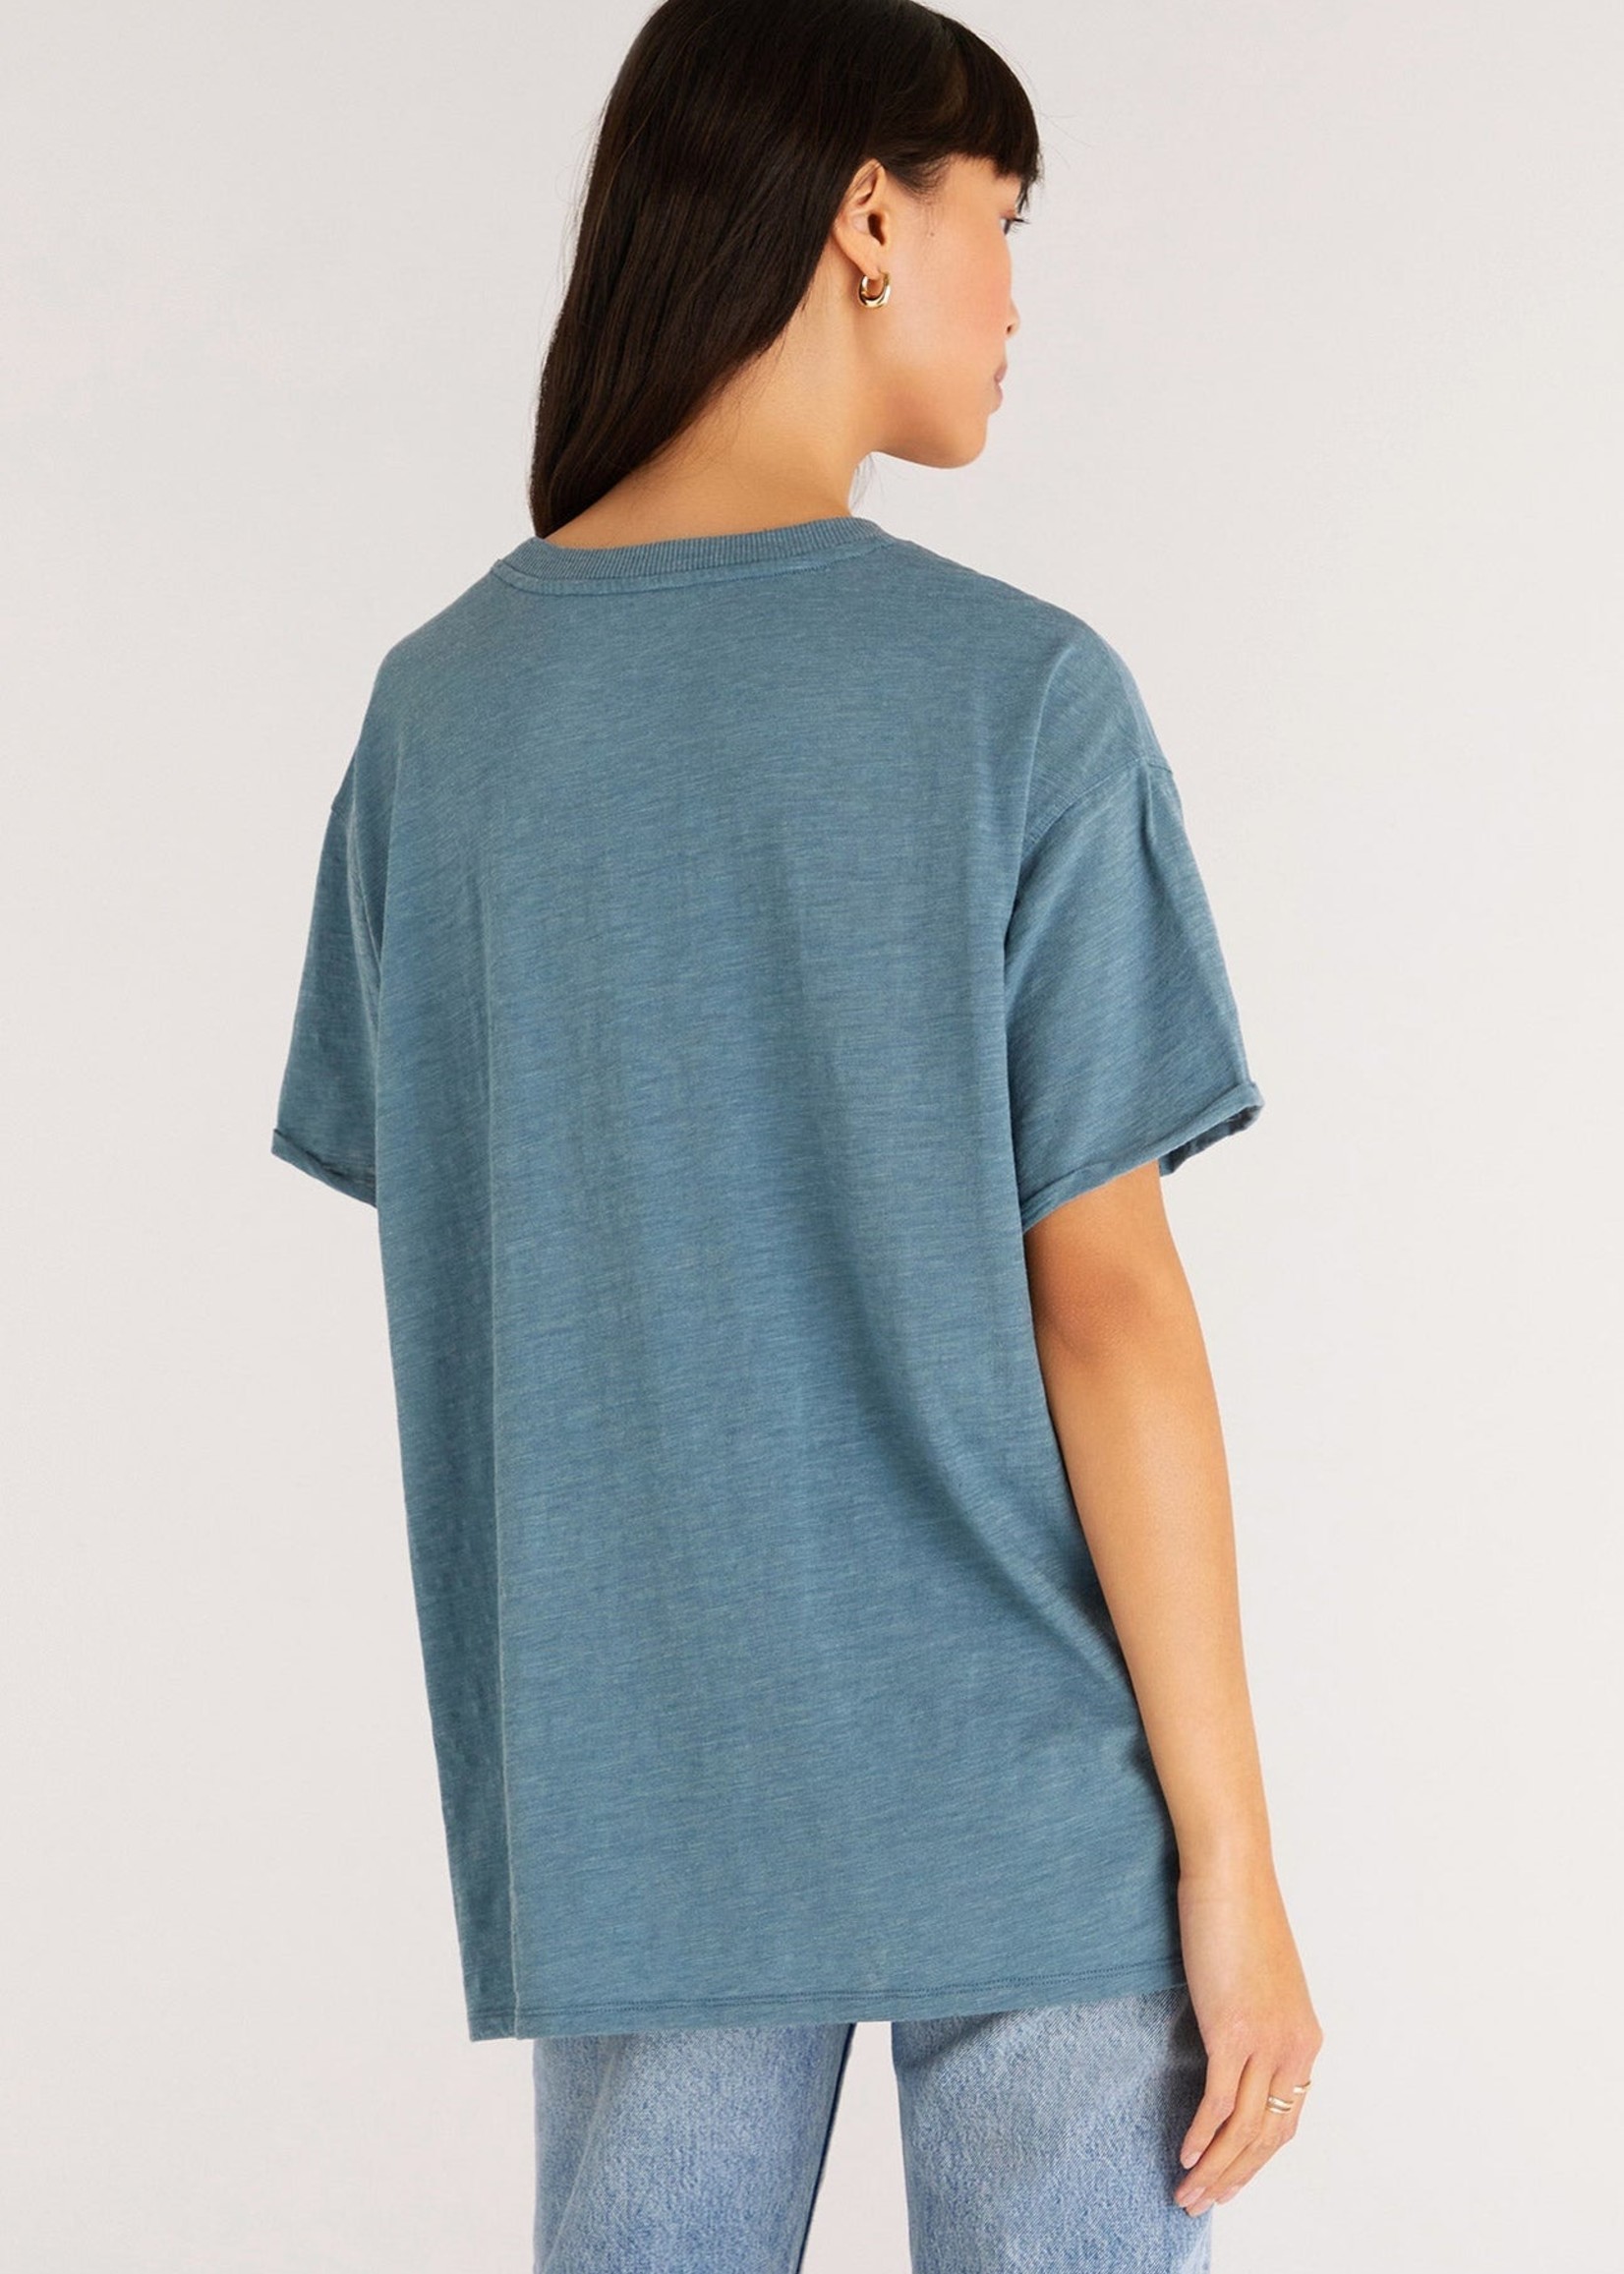 Z SUPPLY The Oversized Tee